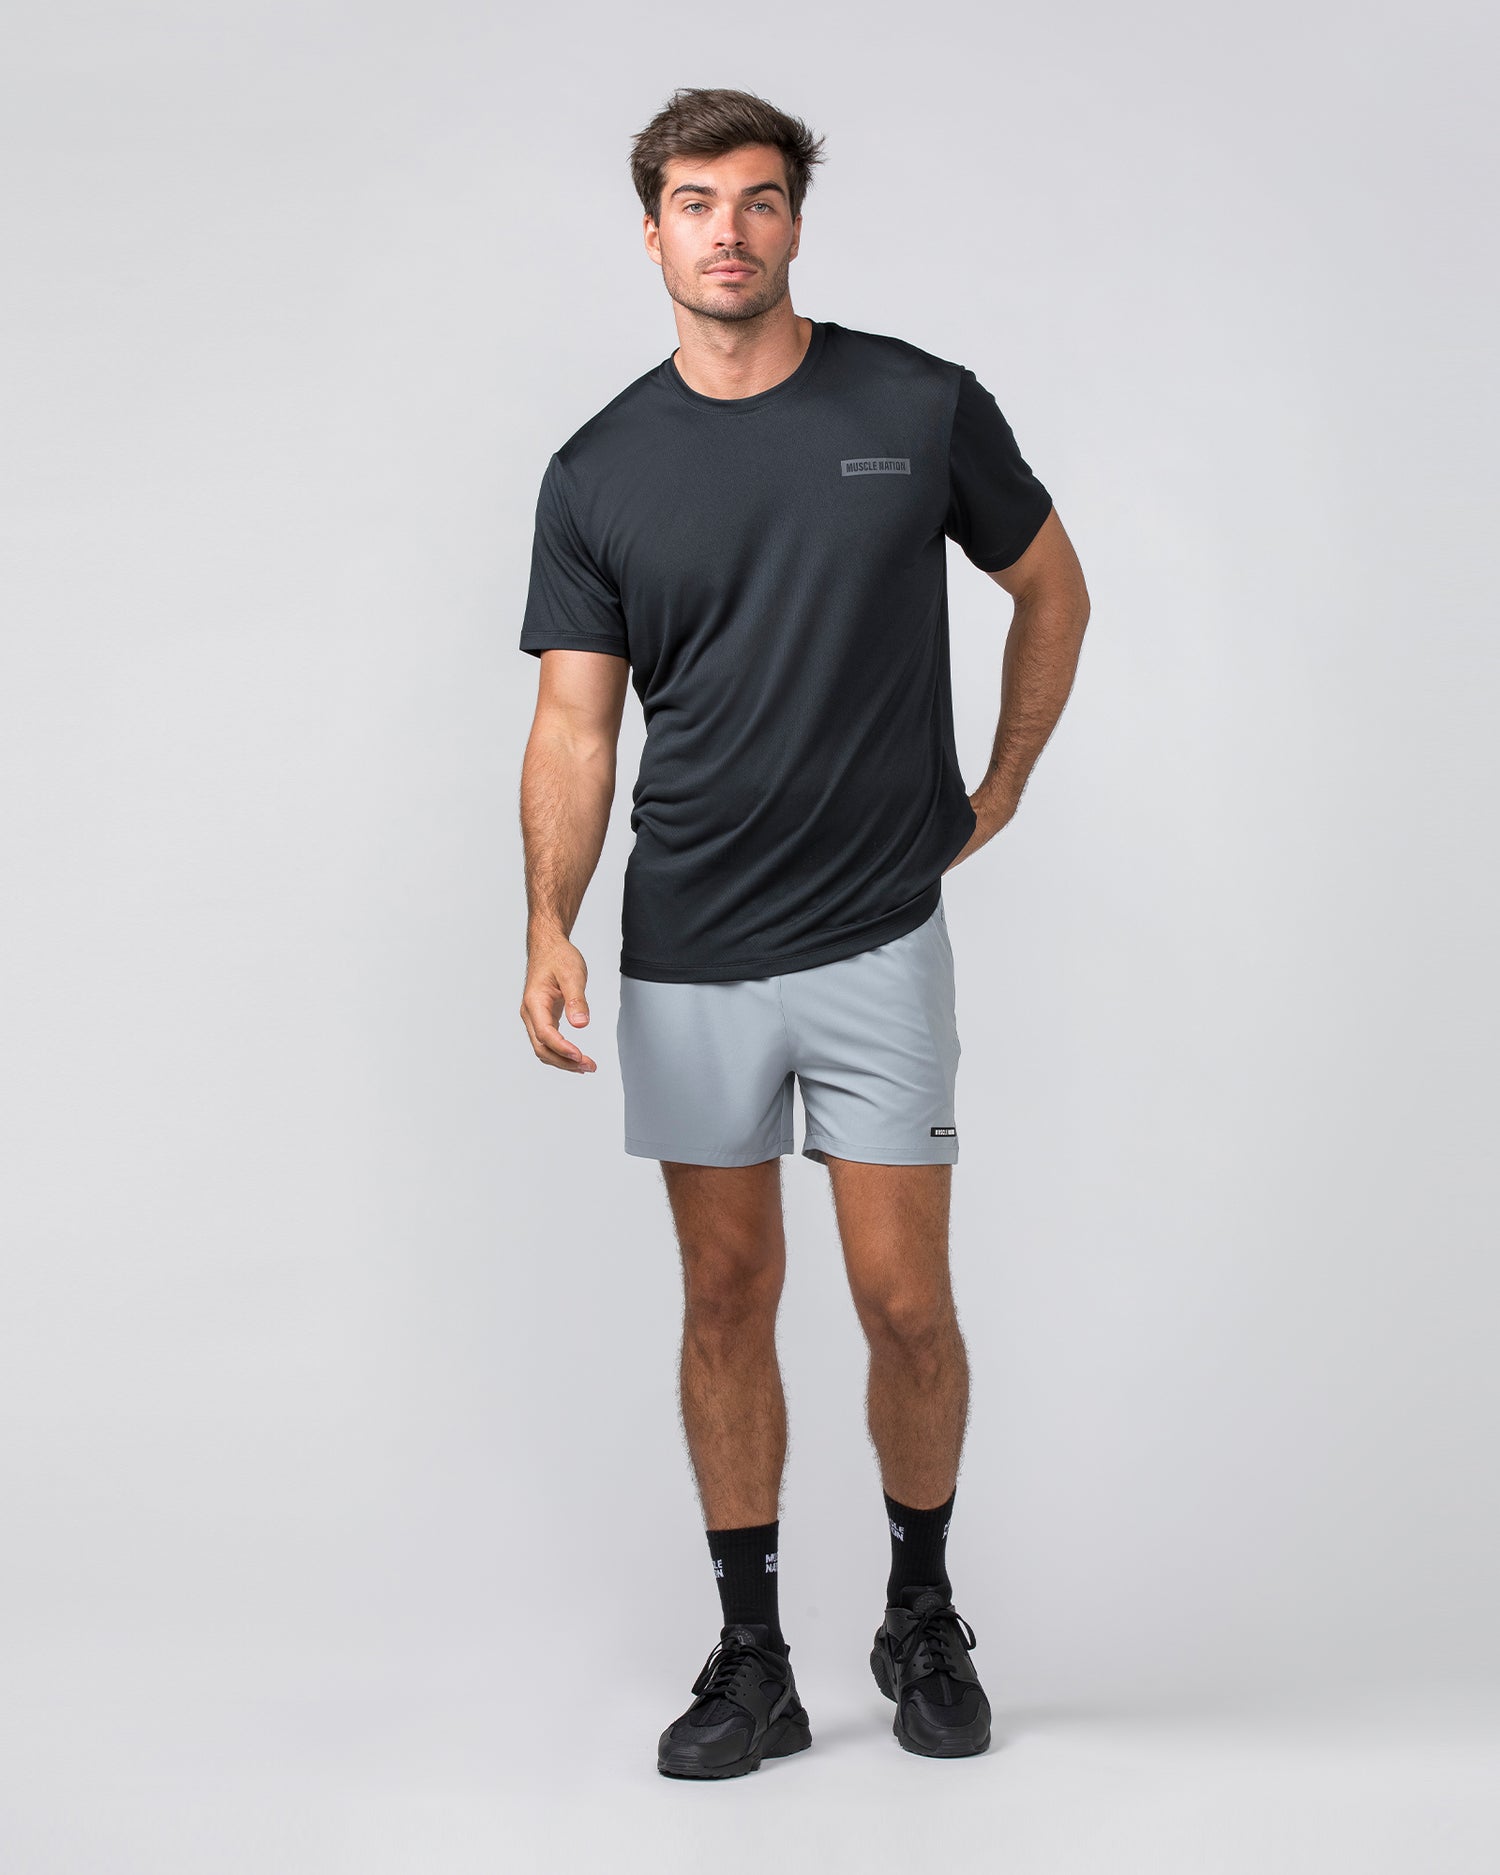 Relaxed Active Tee - Black